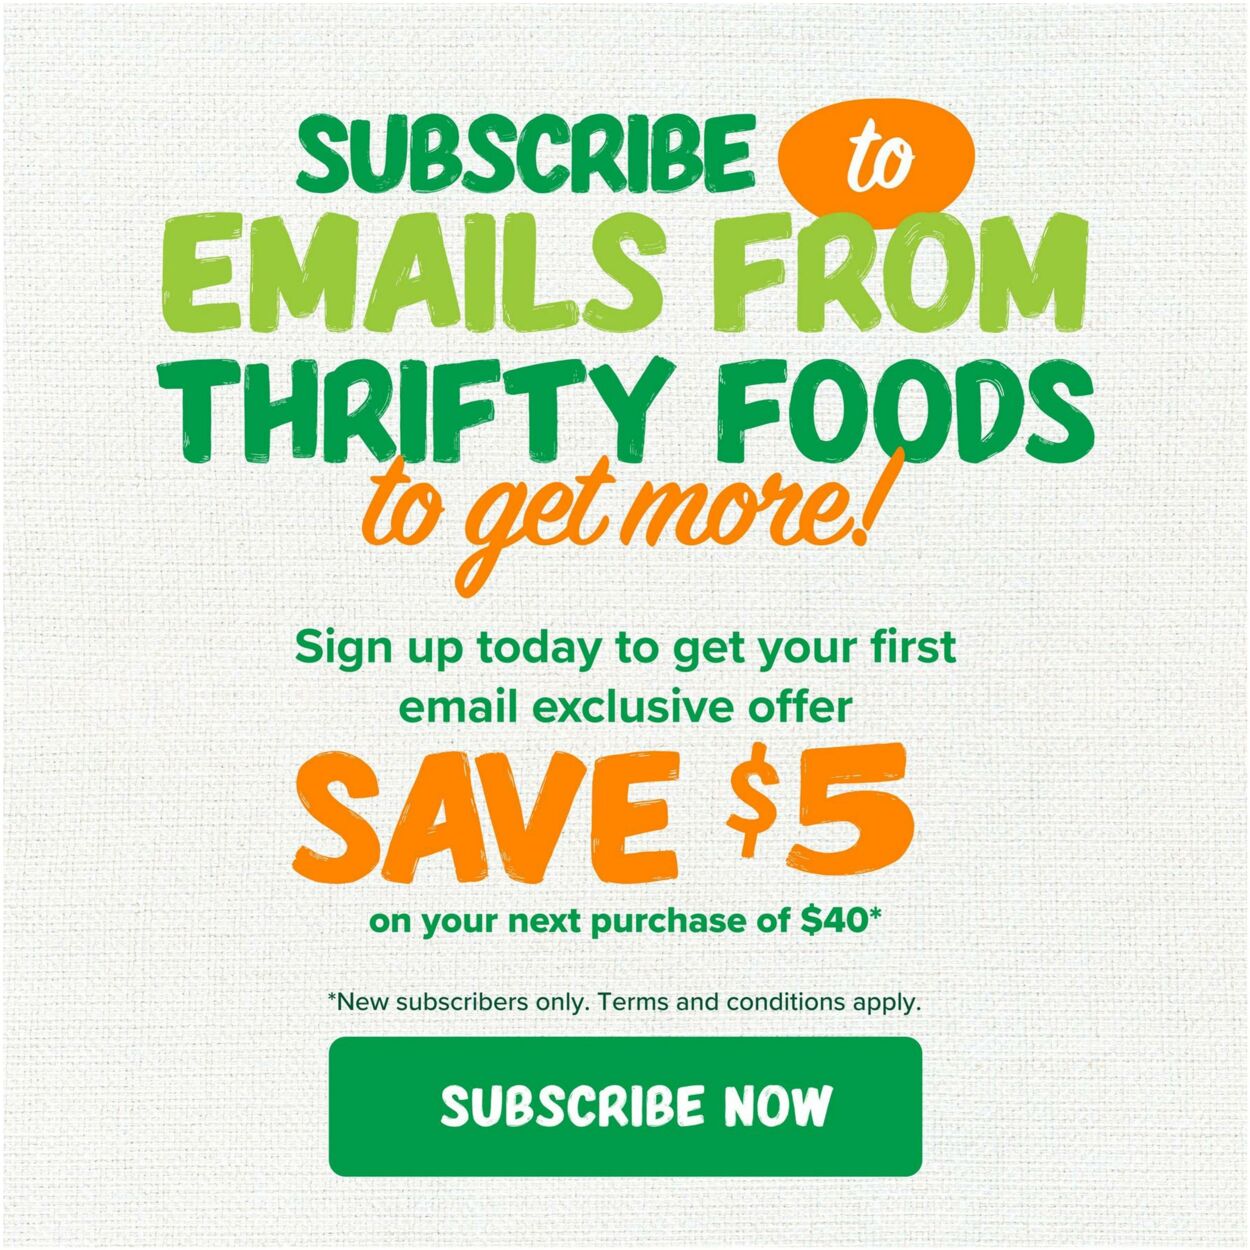 Flyer Thrifty Foods 29.12.2022 - 04.01.2023